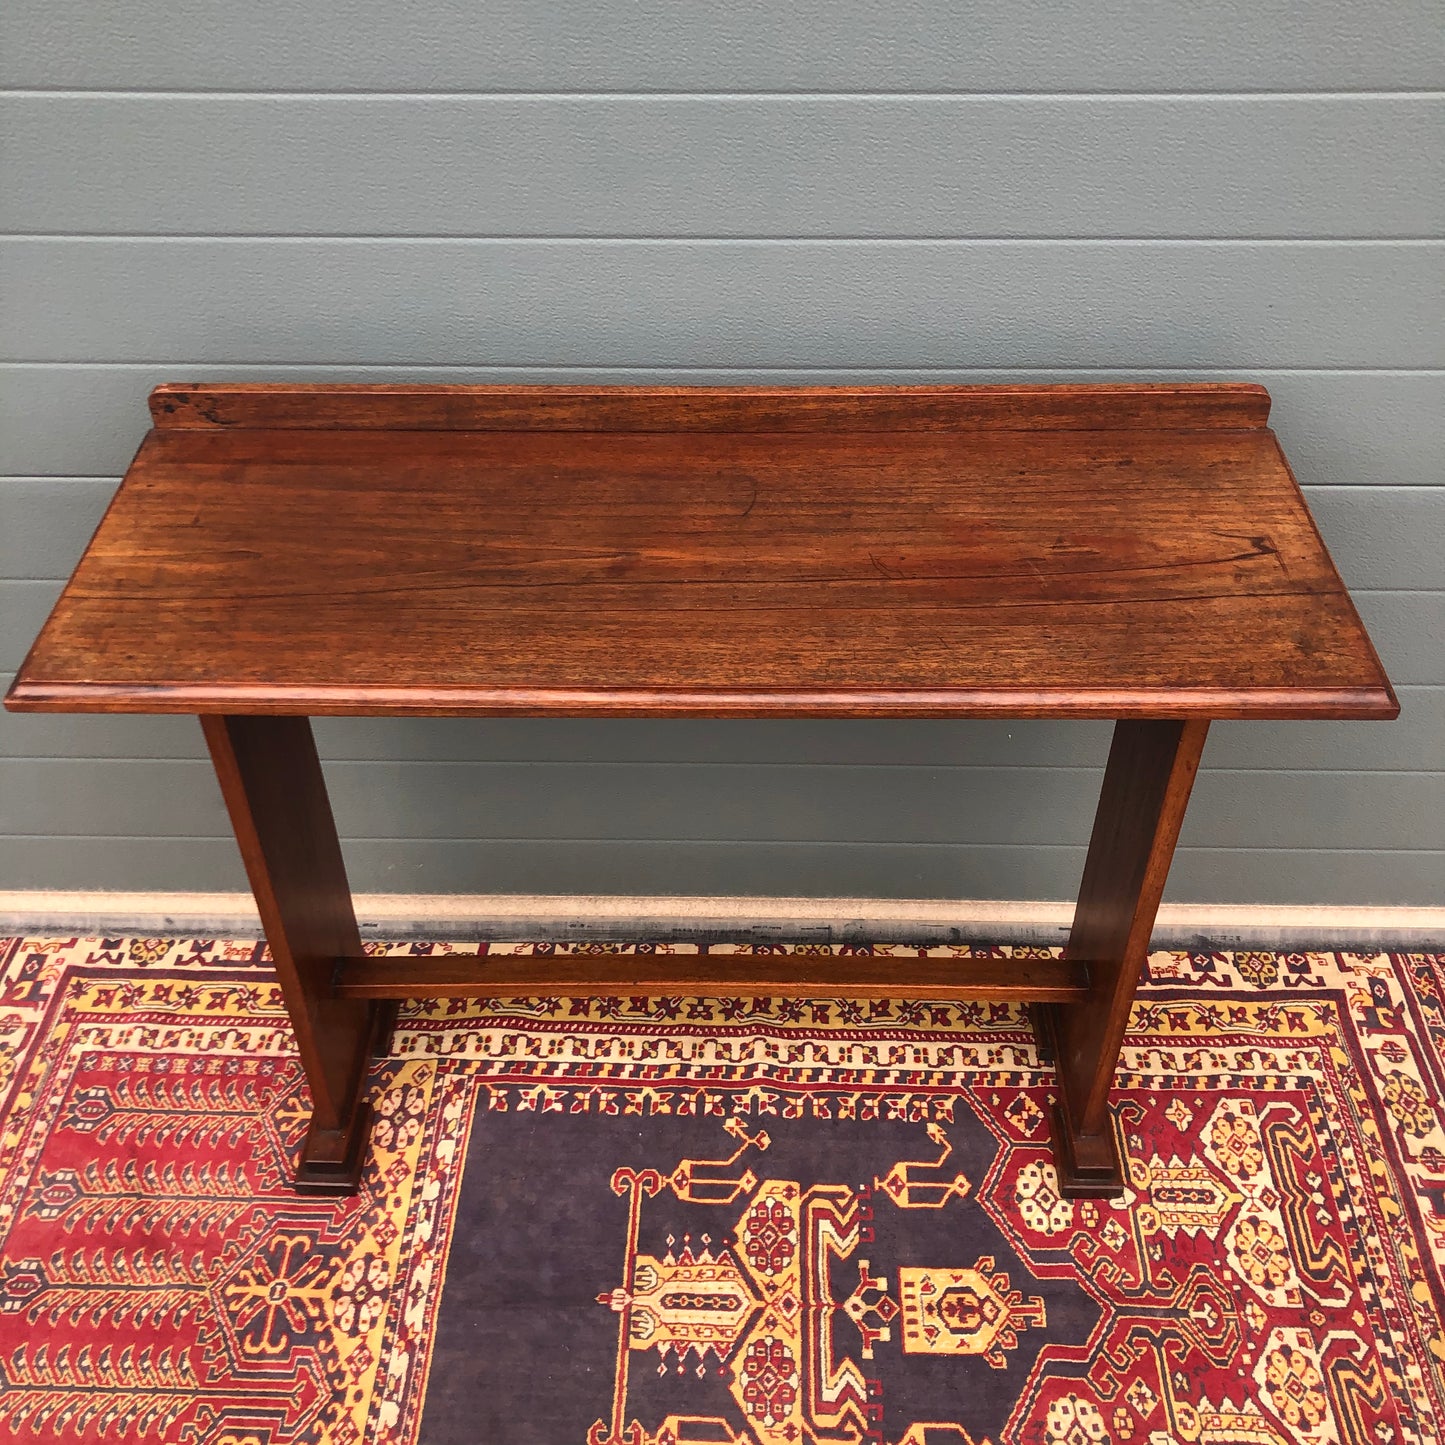 Vintage Arts And Crafts Style Hall Table / Gothic Style Side Table ( SOLD )